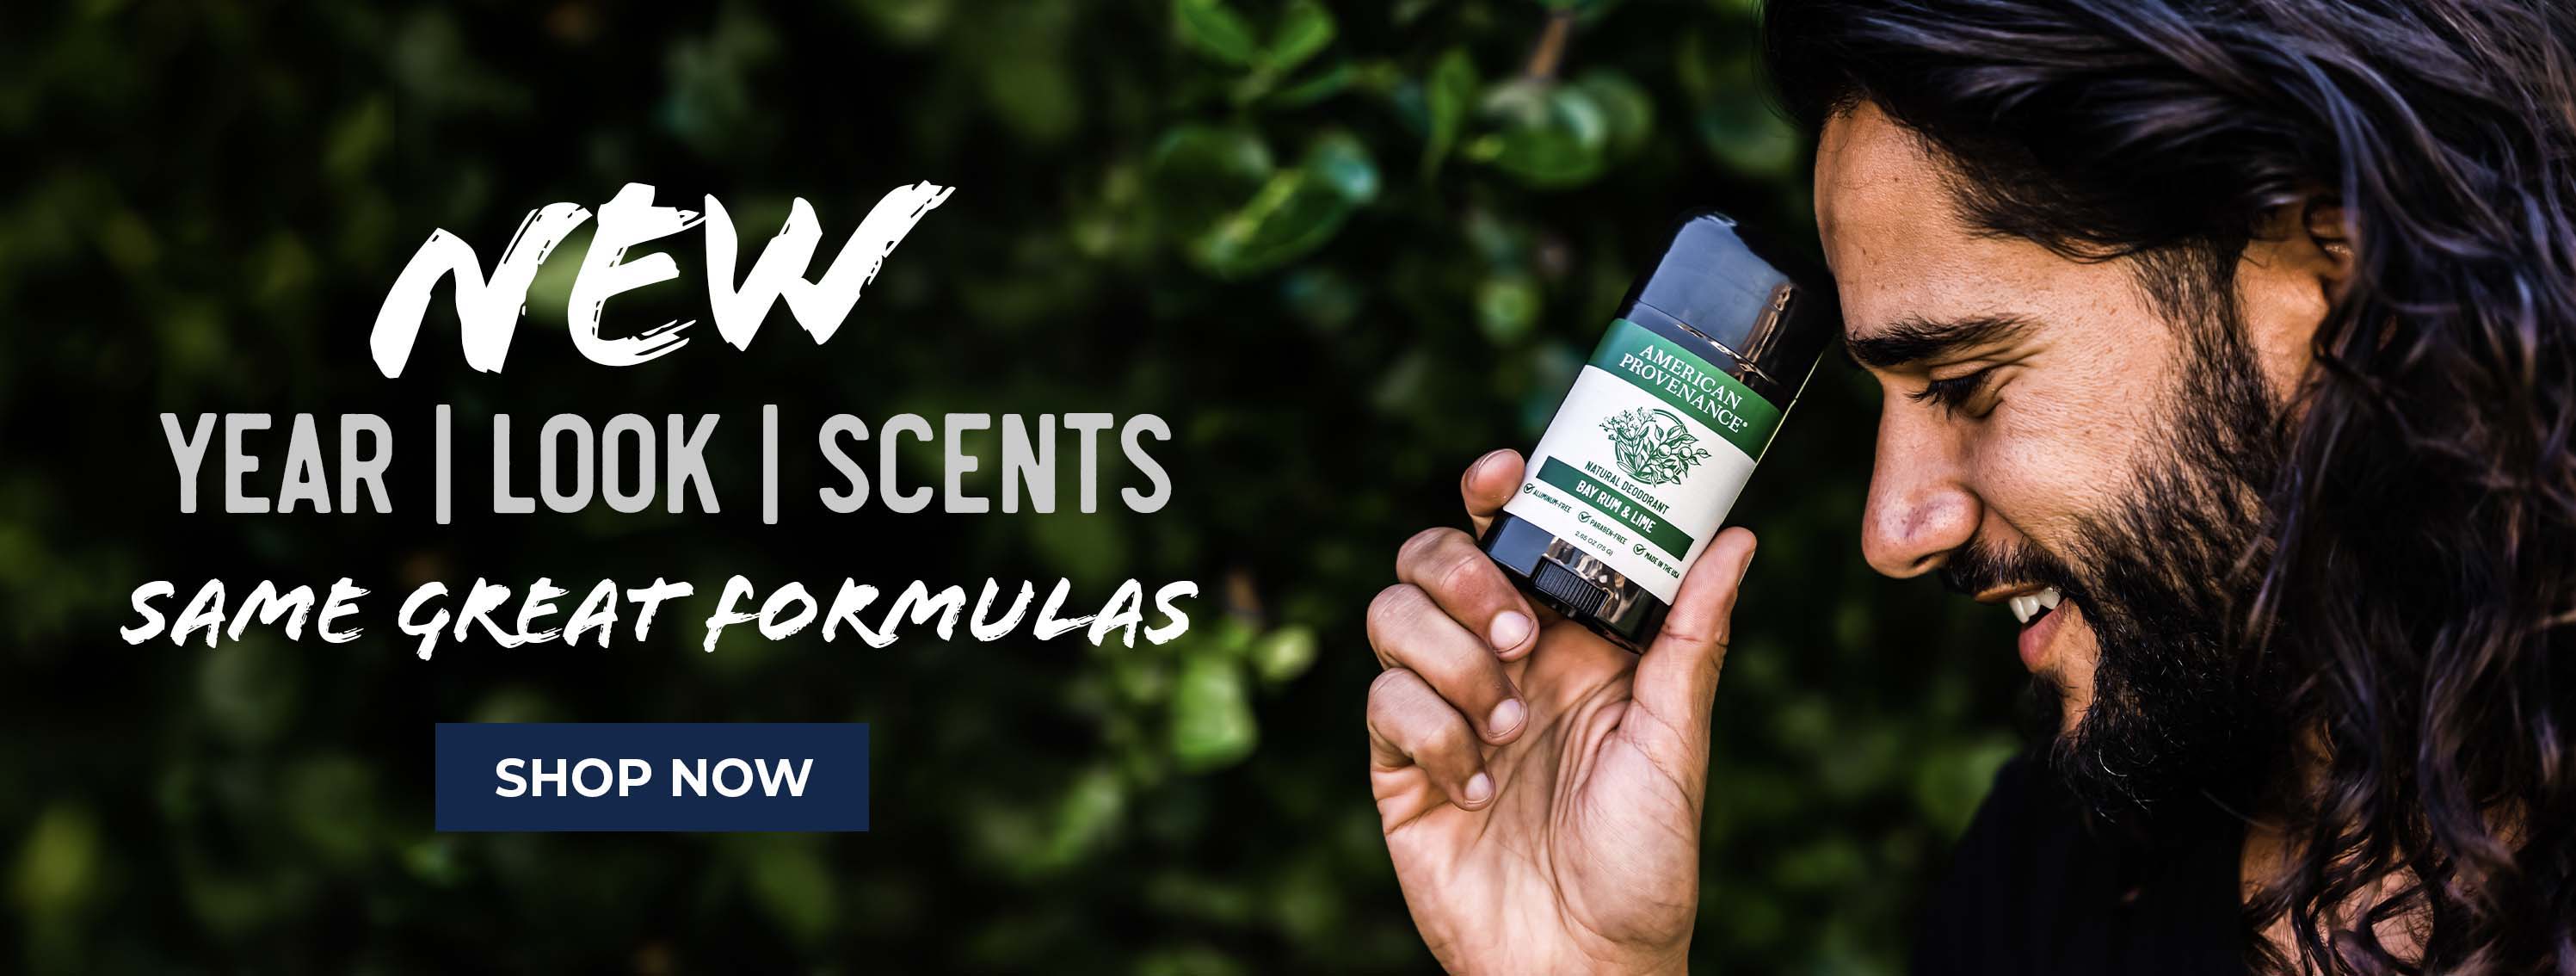 New Year. New Look. New Scents. Same Great formulas. Shop Now.